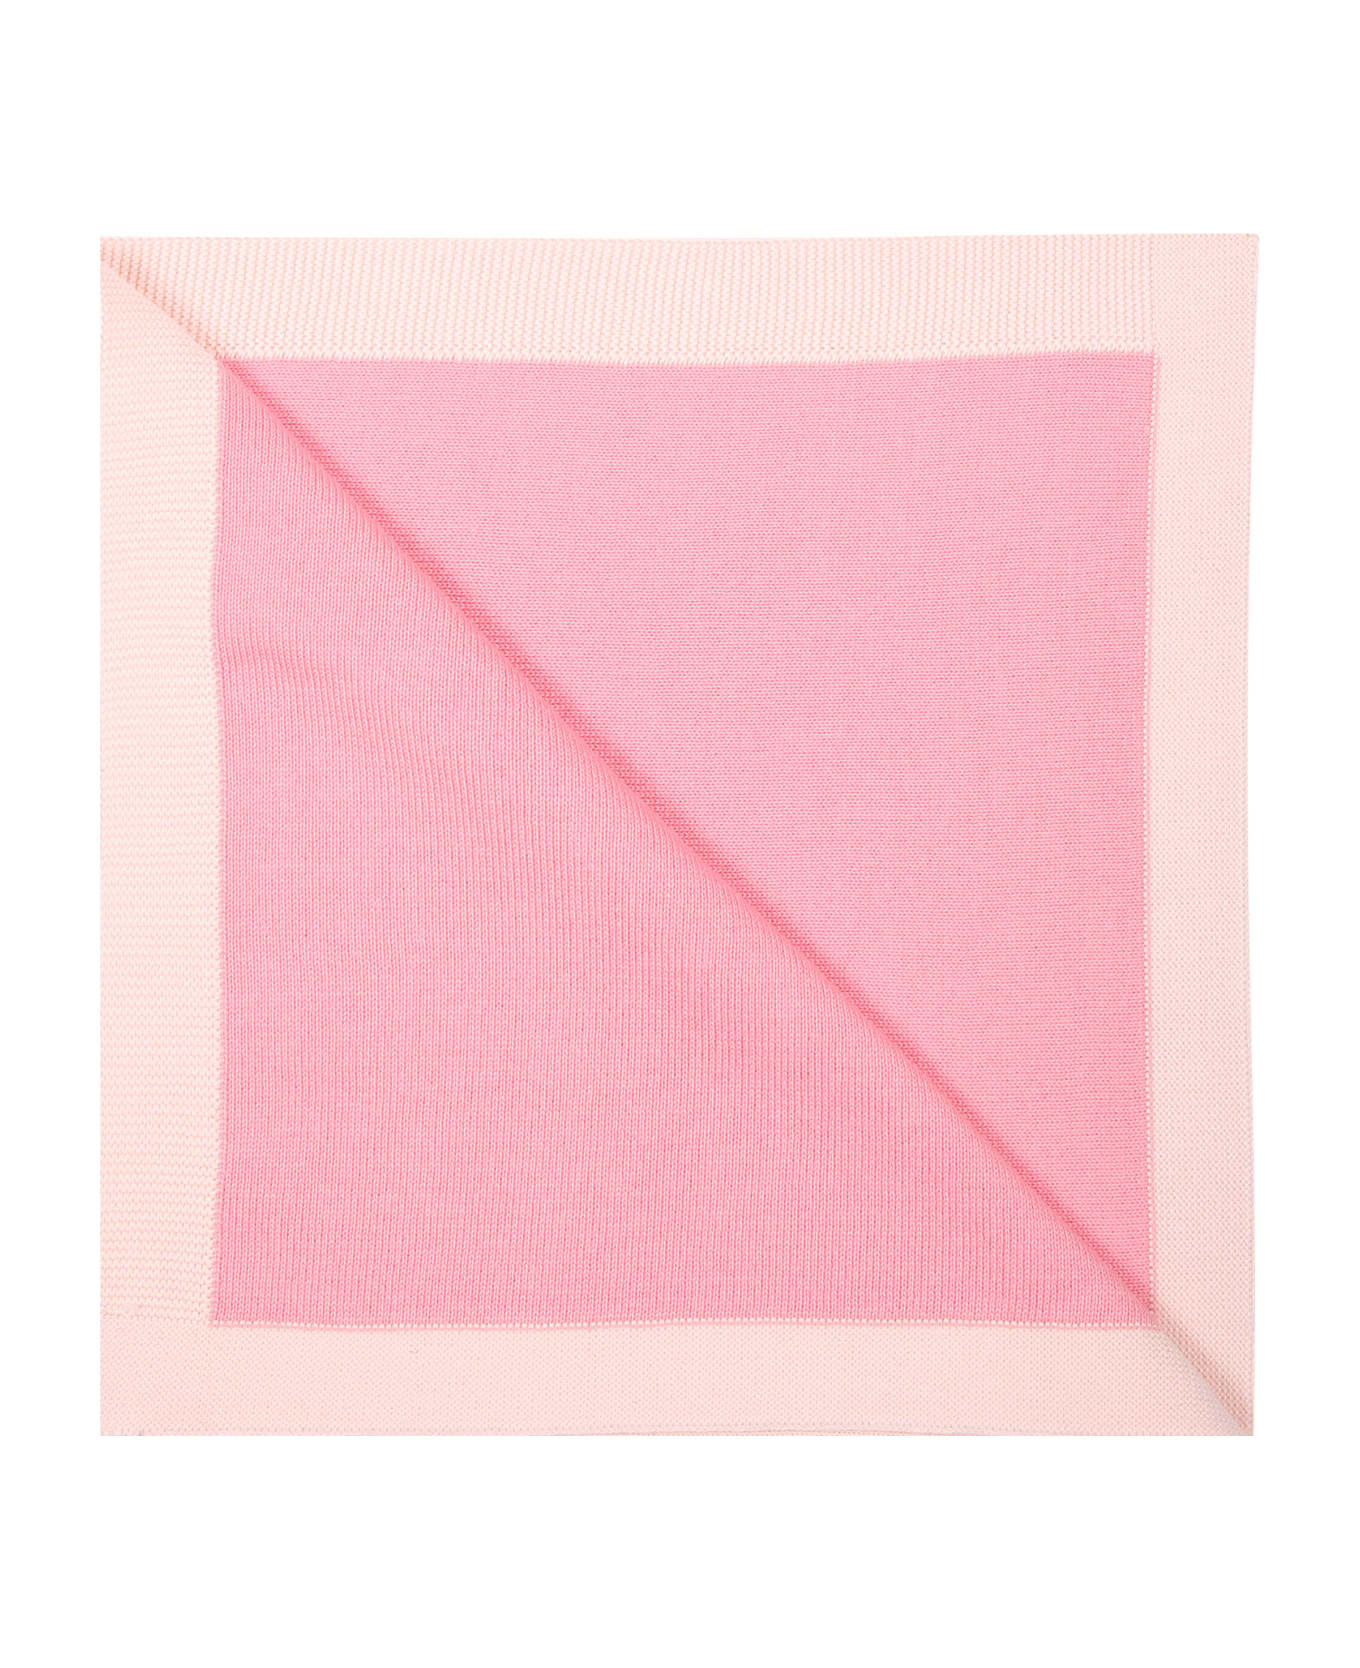 Kenzo Kids Pink Blanket For Baby Girl With Logo - Pink アクセサリー＆ギフト